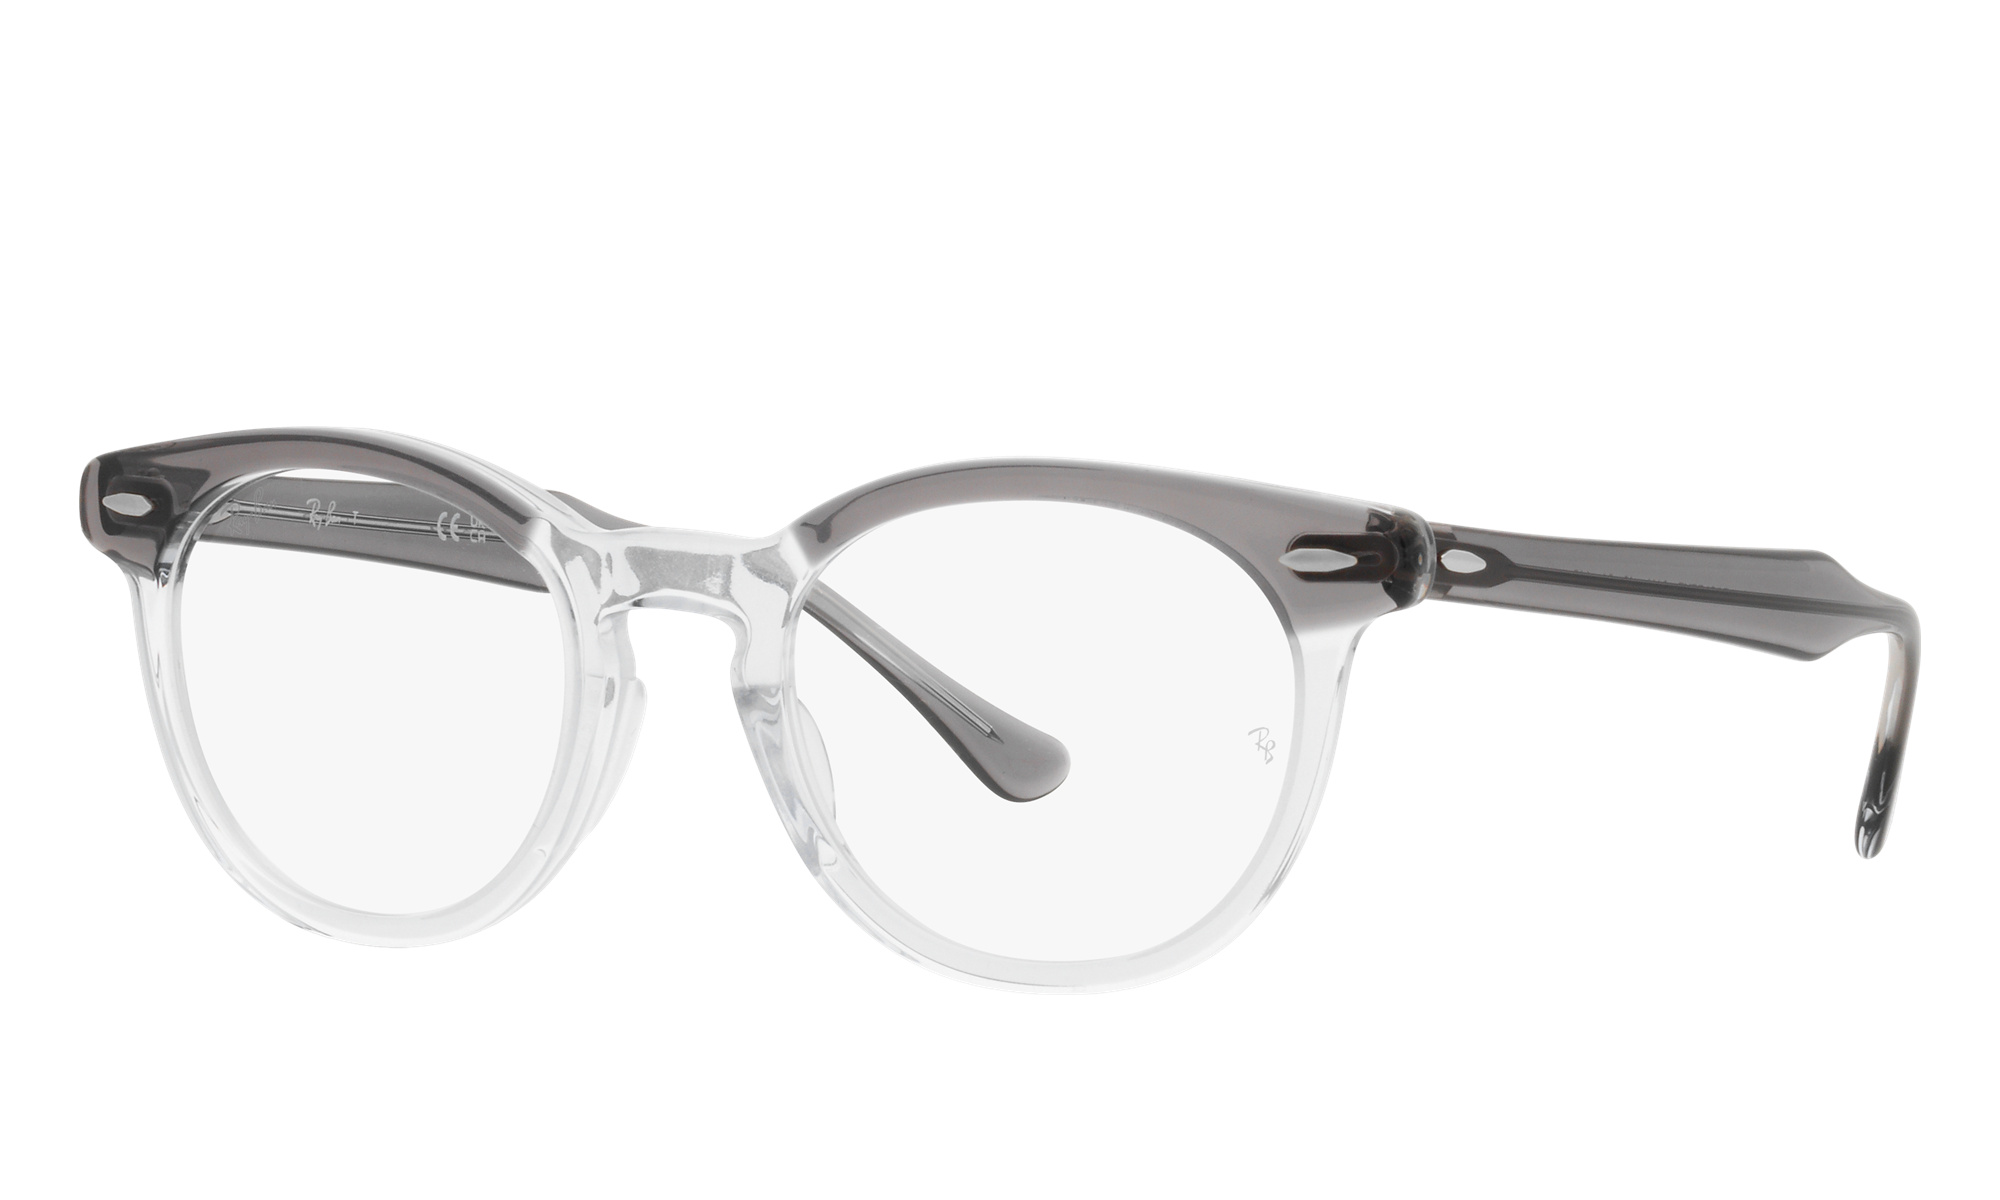 Ray-Ban Unisex Rx5598 Grey On Transparent Size: Small